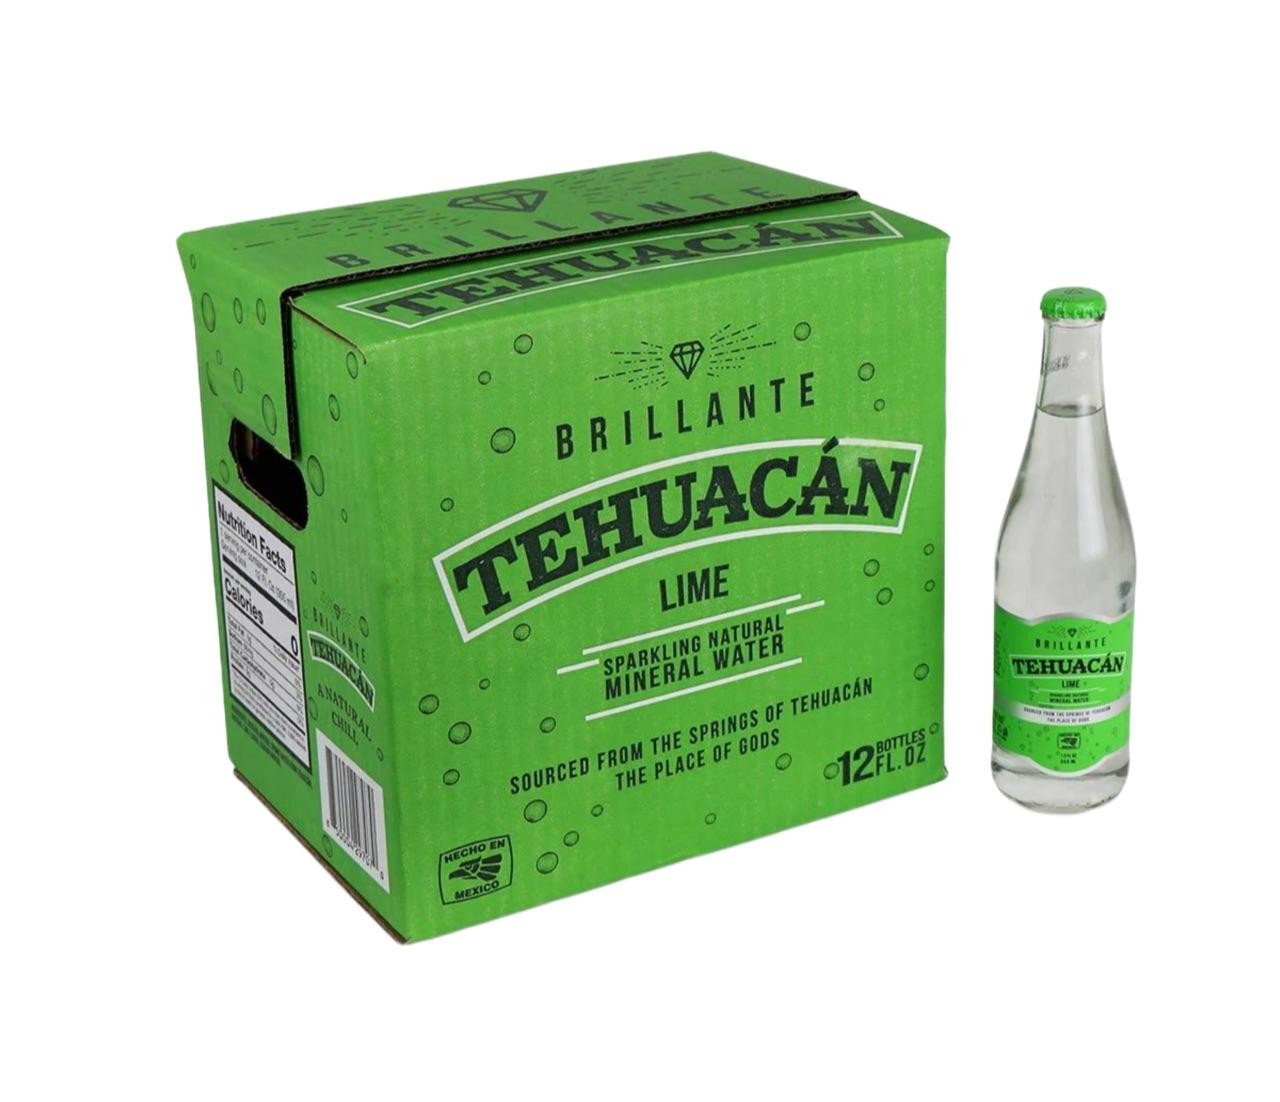 Tehuacan Brillante Mineral Water with Lime (12 oz)